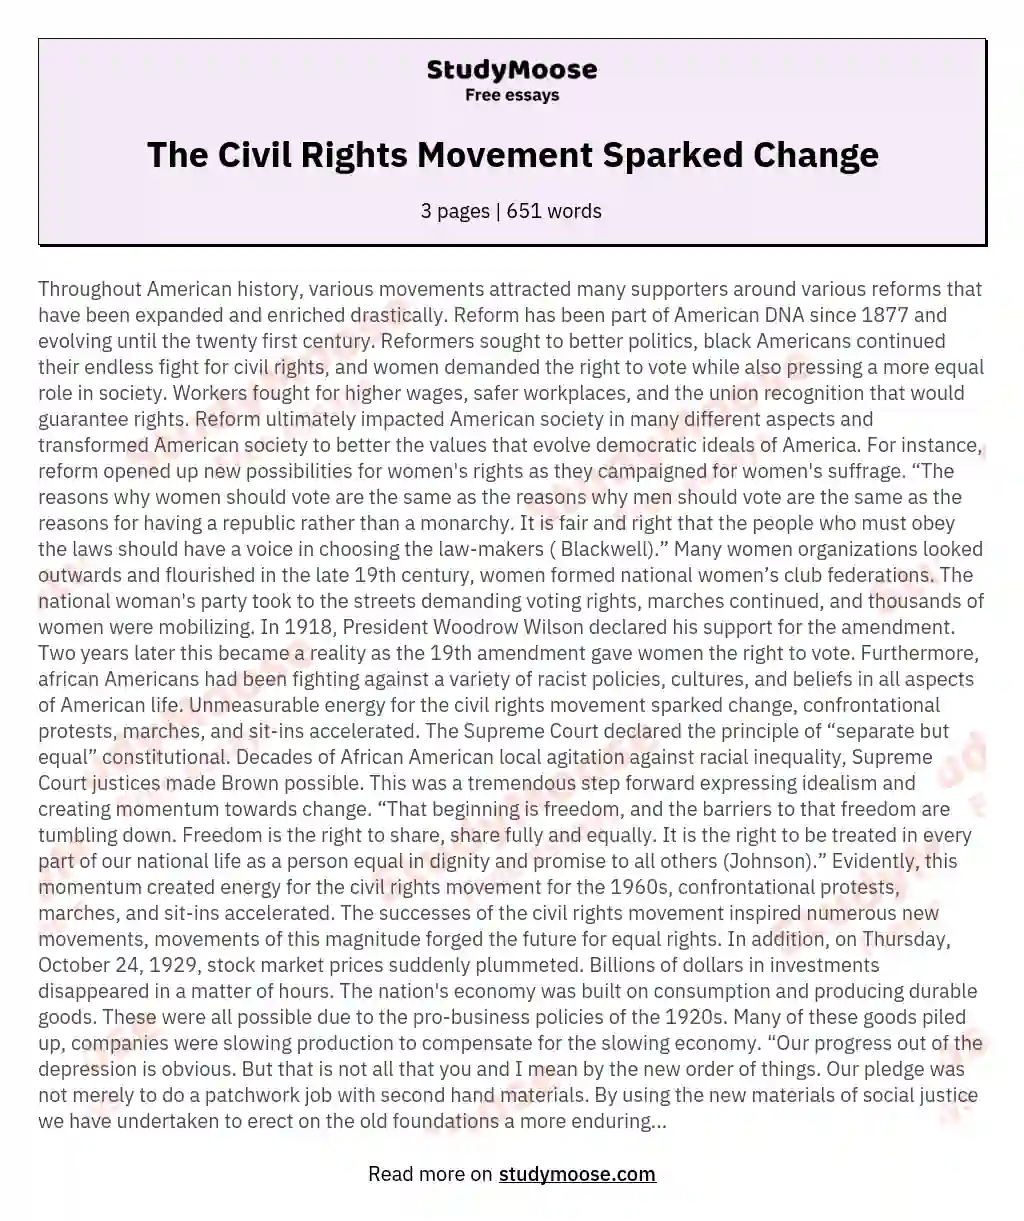 The Civil Rights Movement Sparked Change essay